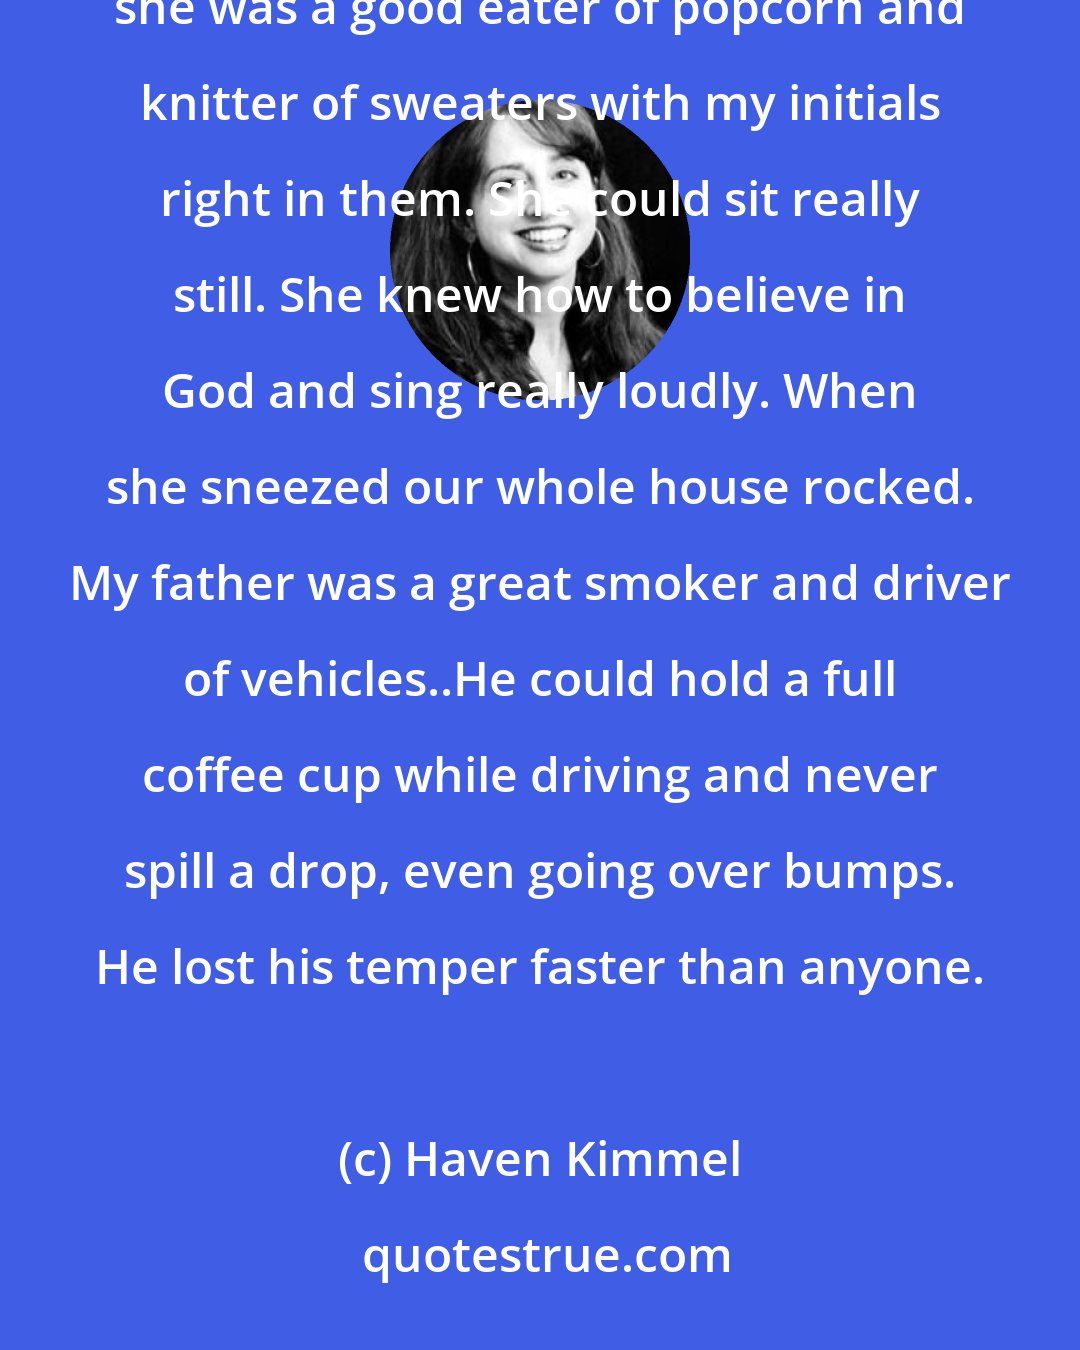 Haven Kimmel: My mother was good at reading books, making cinnamon biscuits, and coloring in a coloring book. Also she was a good eater of popcorn and knitter of sweaters with my initials right in them. She could sit really still. She knew how to believe in God and sing really loudly. When she sneezed our whole house rocked. My father was a great smoker and driver of vehicles..He could hold a full coffee cup while driving and never spill a drop, even going over bumps. He lost his temper faster than anyone.